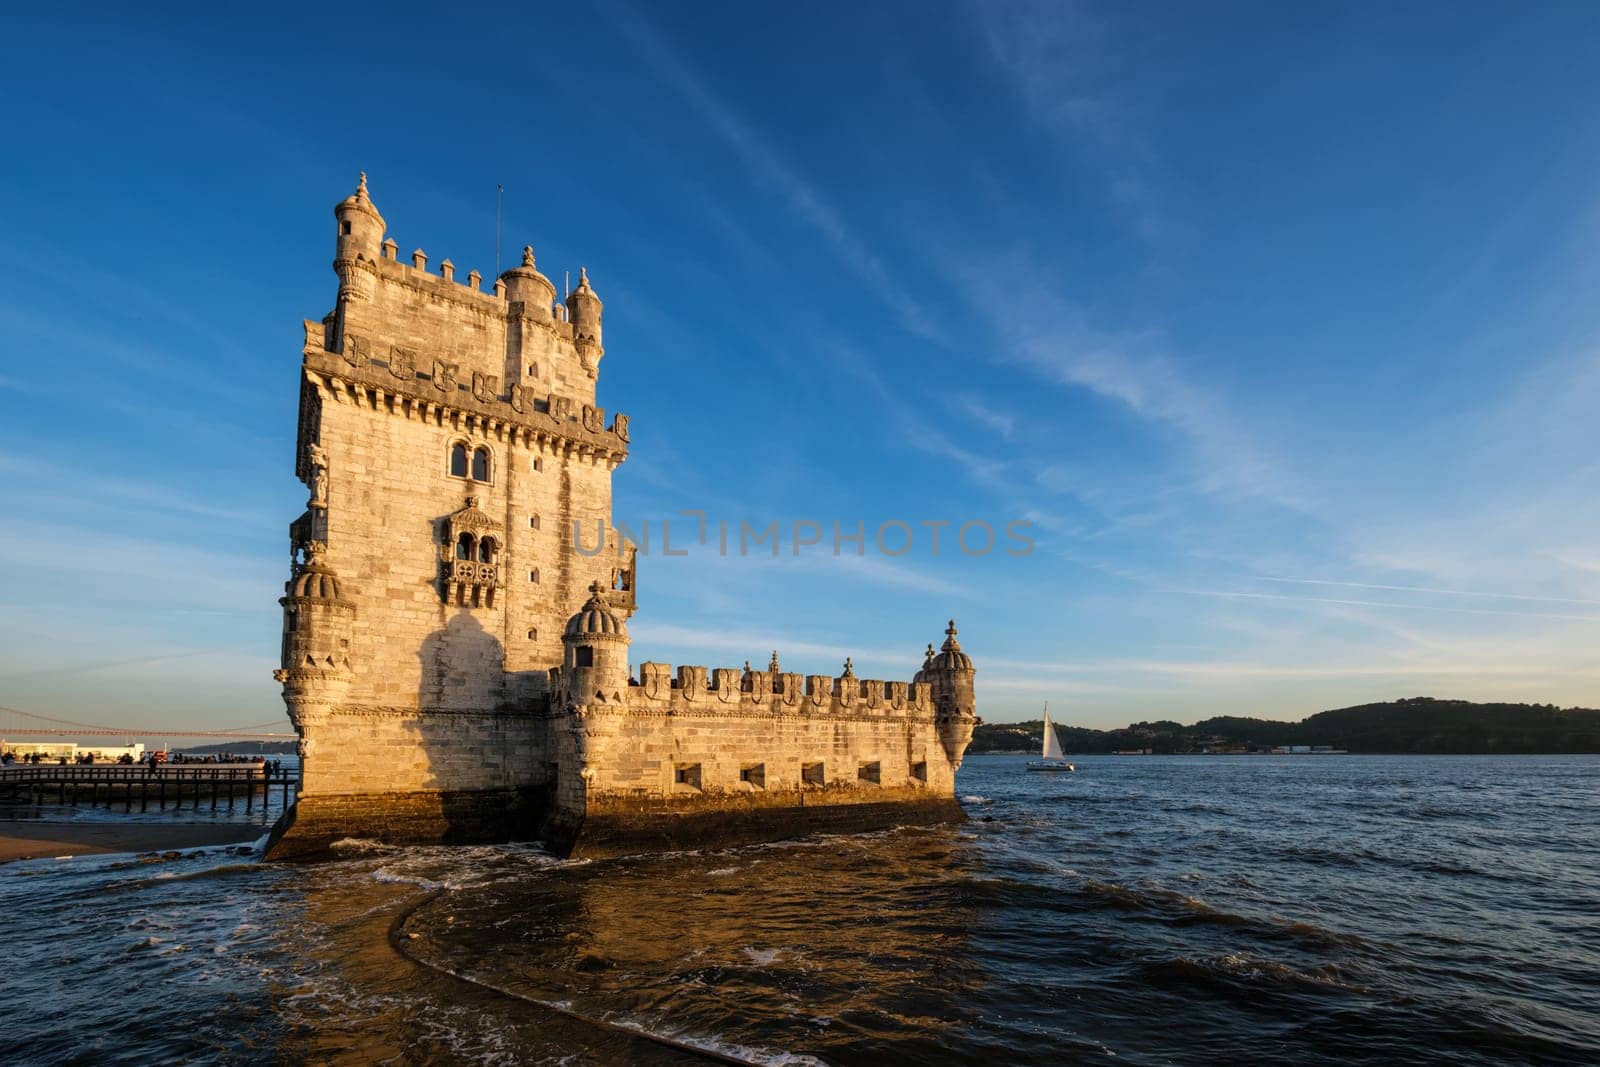 Belem Tower on the bank of the Tagus River on sunset. Lisbon, Portugal by dimol